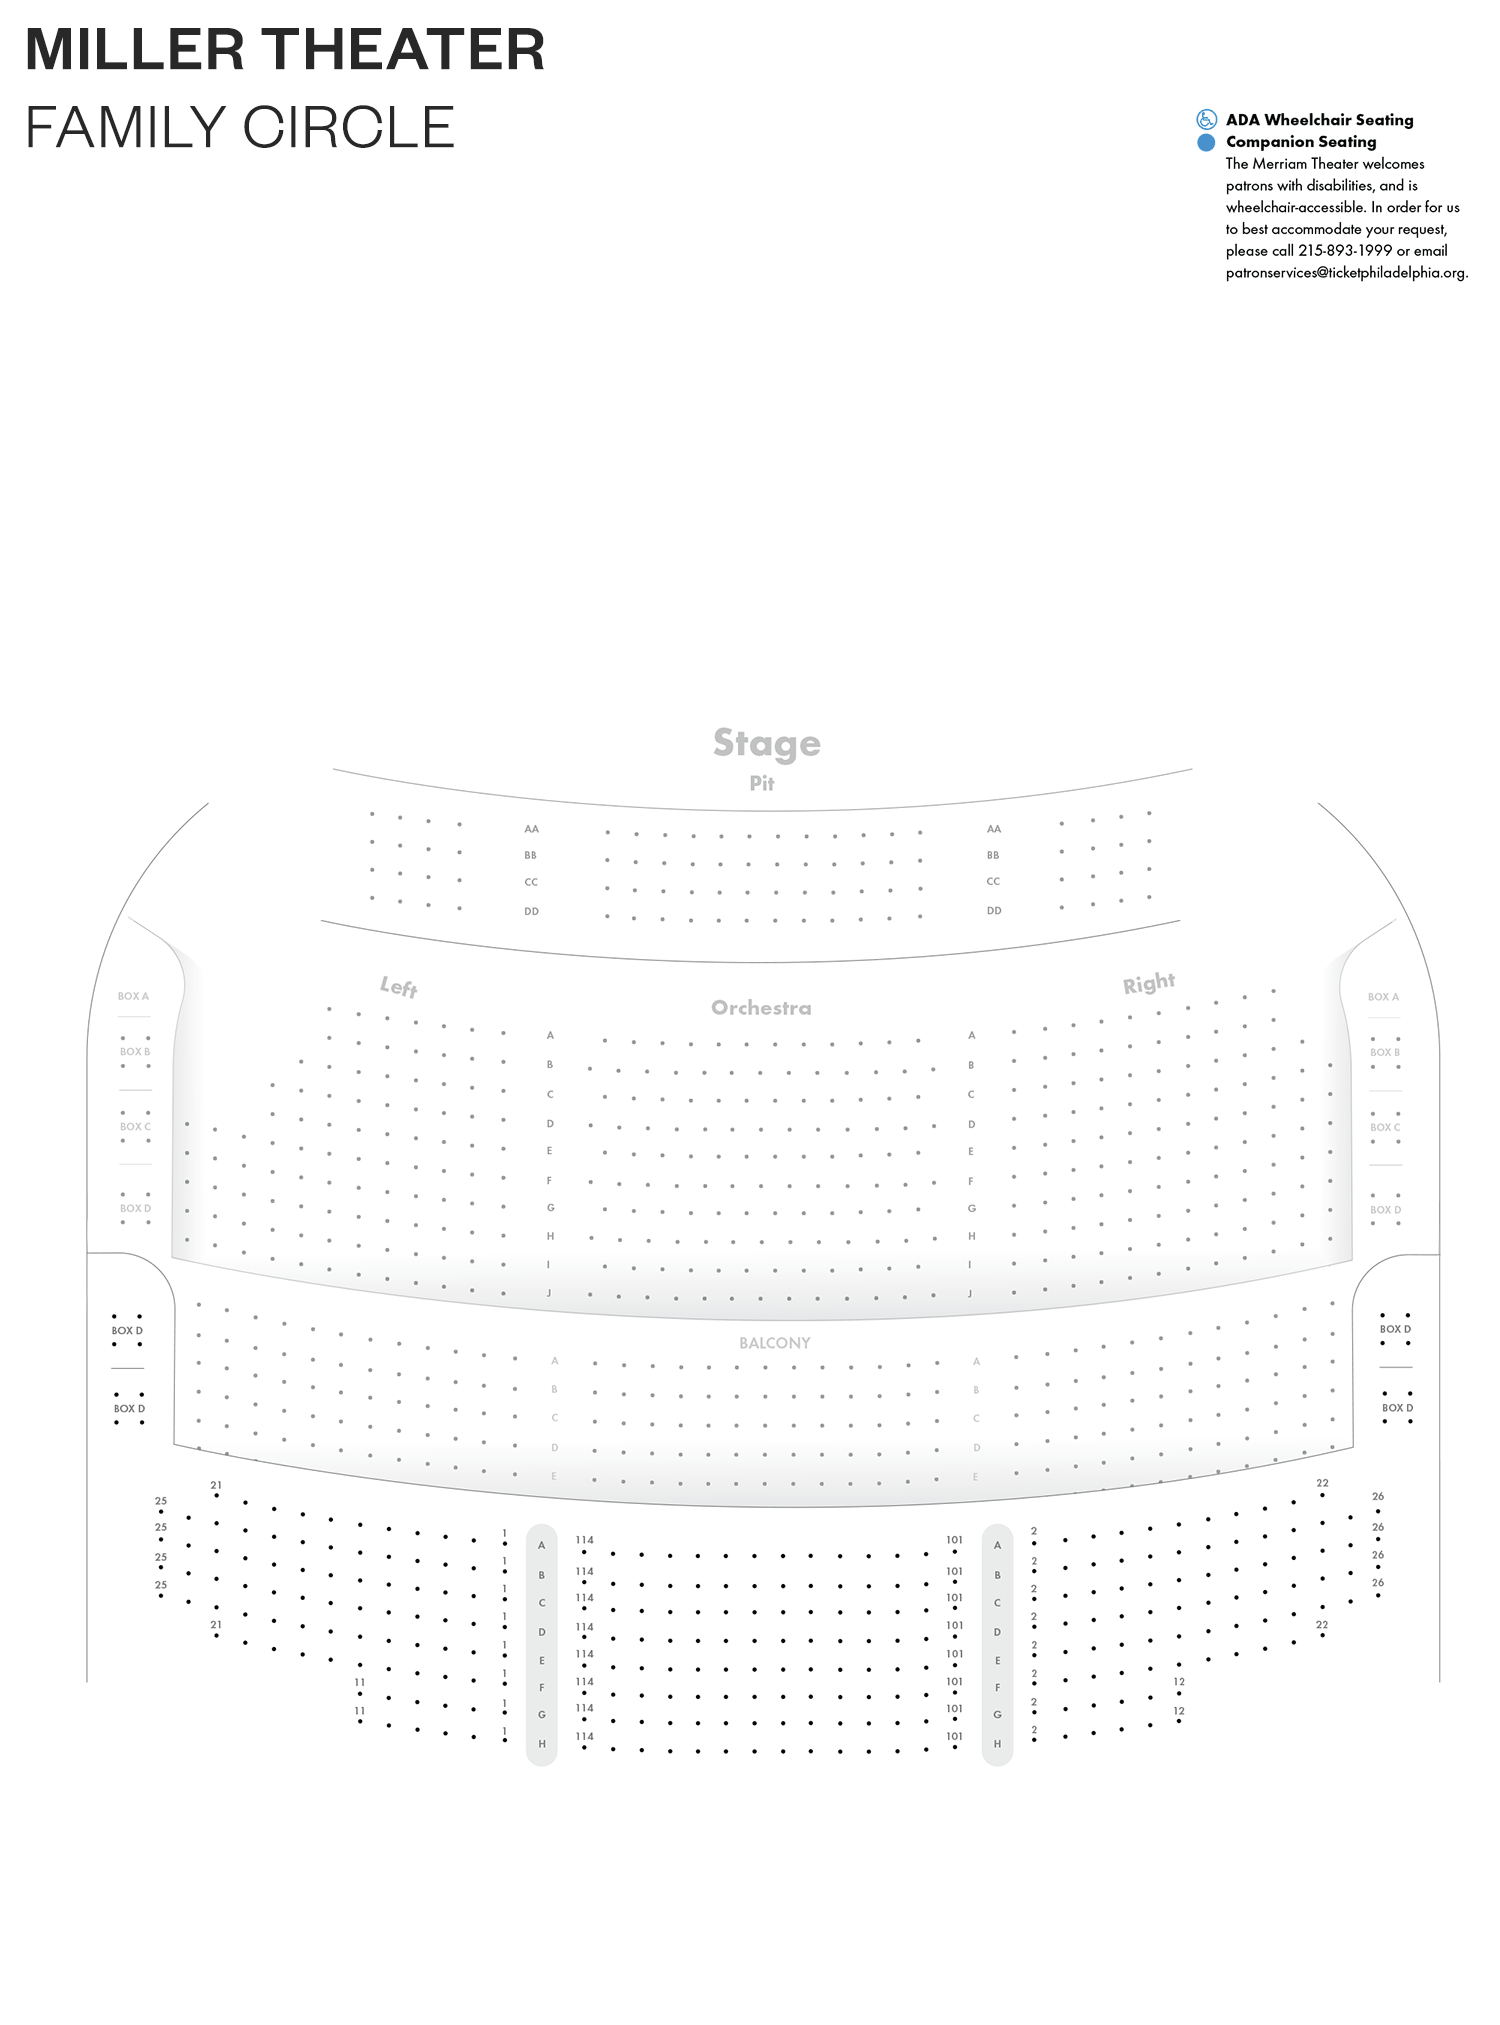 Miller Theater - Family Circle - Seating Chart